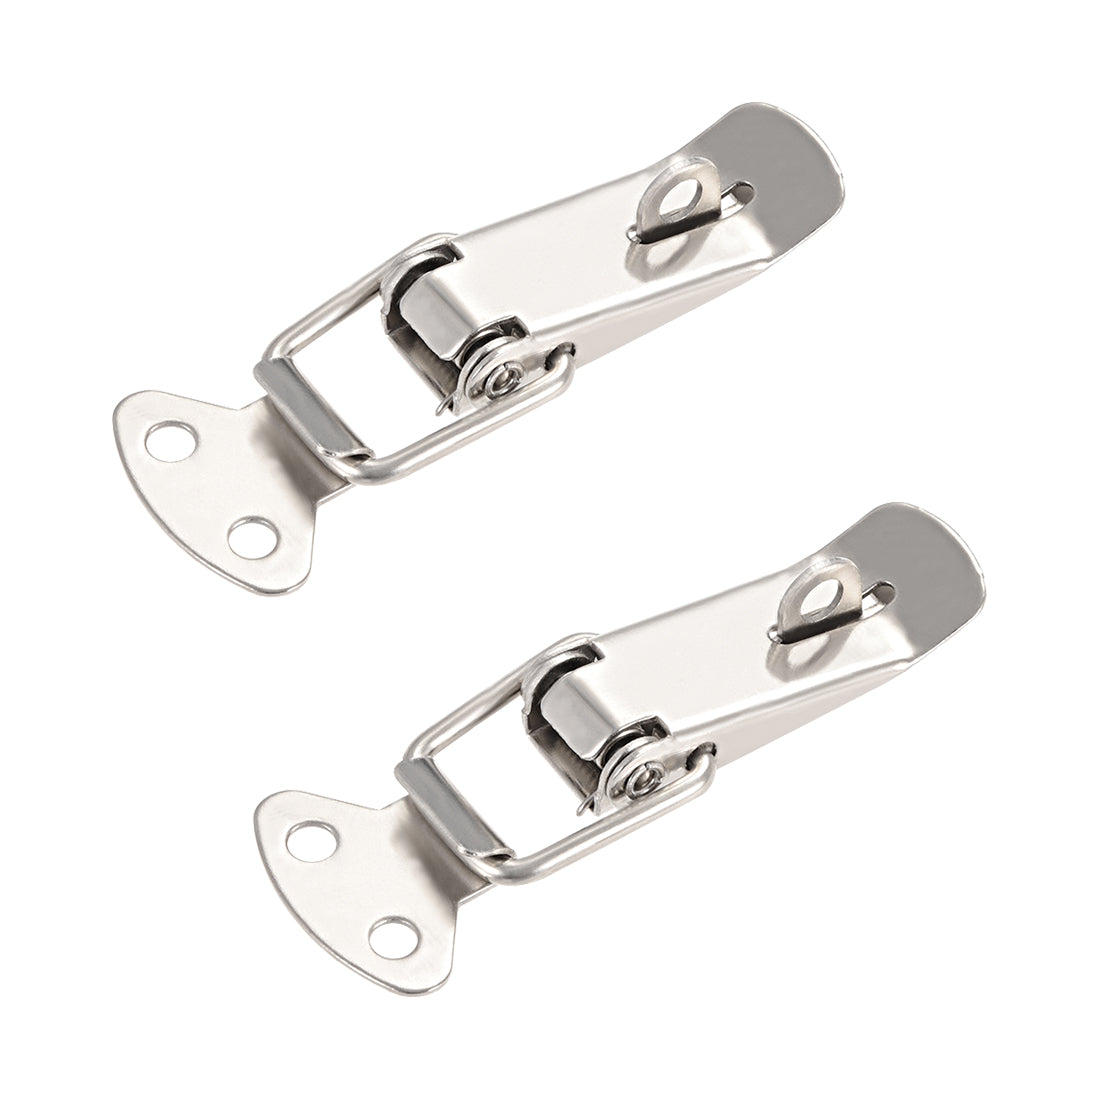 uxcell Uxcell Iron Spring Loaded Toggle Case Box Chest Trunk Latch Catches Hasps Clamp 2 pcs, 72mm Overall Length